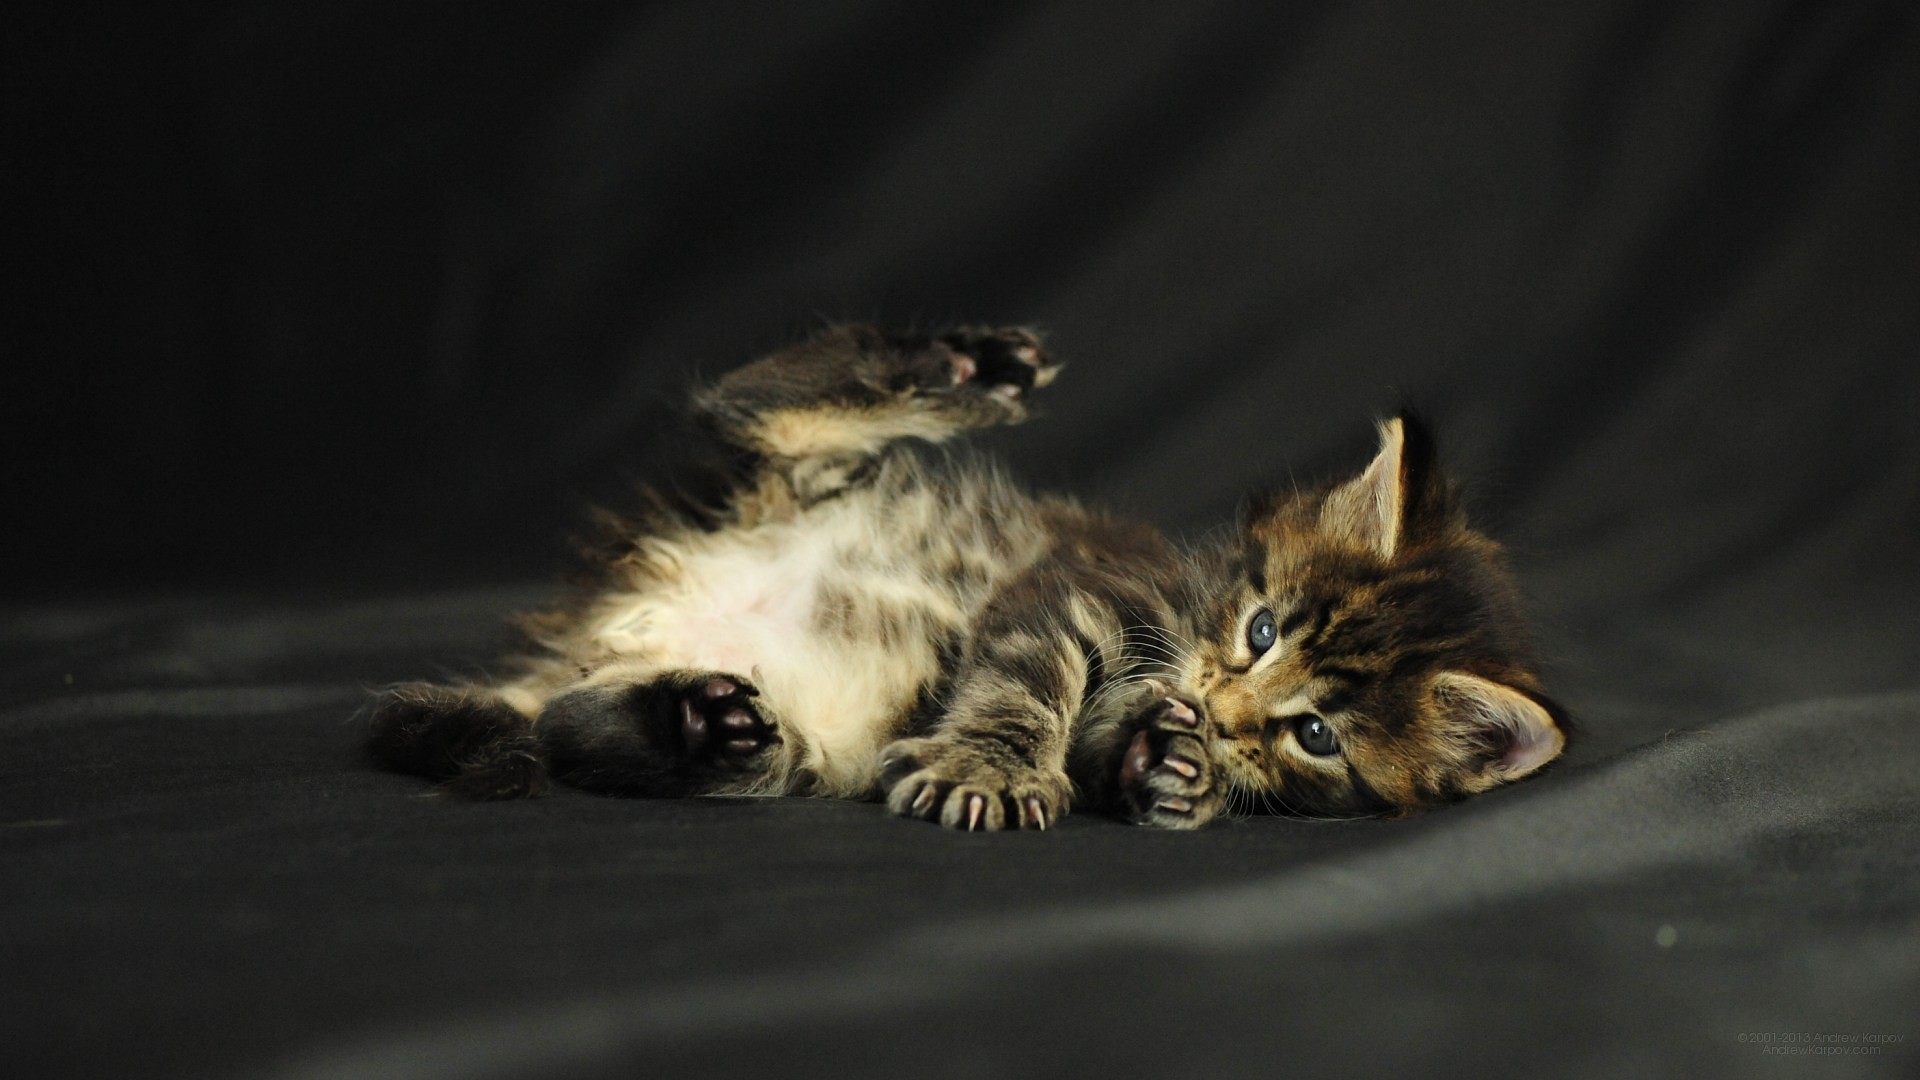 1920x1080 Pictures lolcat Funny Cat desktop wallpaper picture 1920 x 1080 Oracle,  Maine Coon kitten